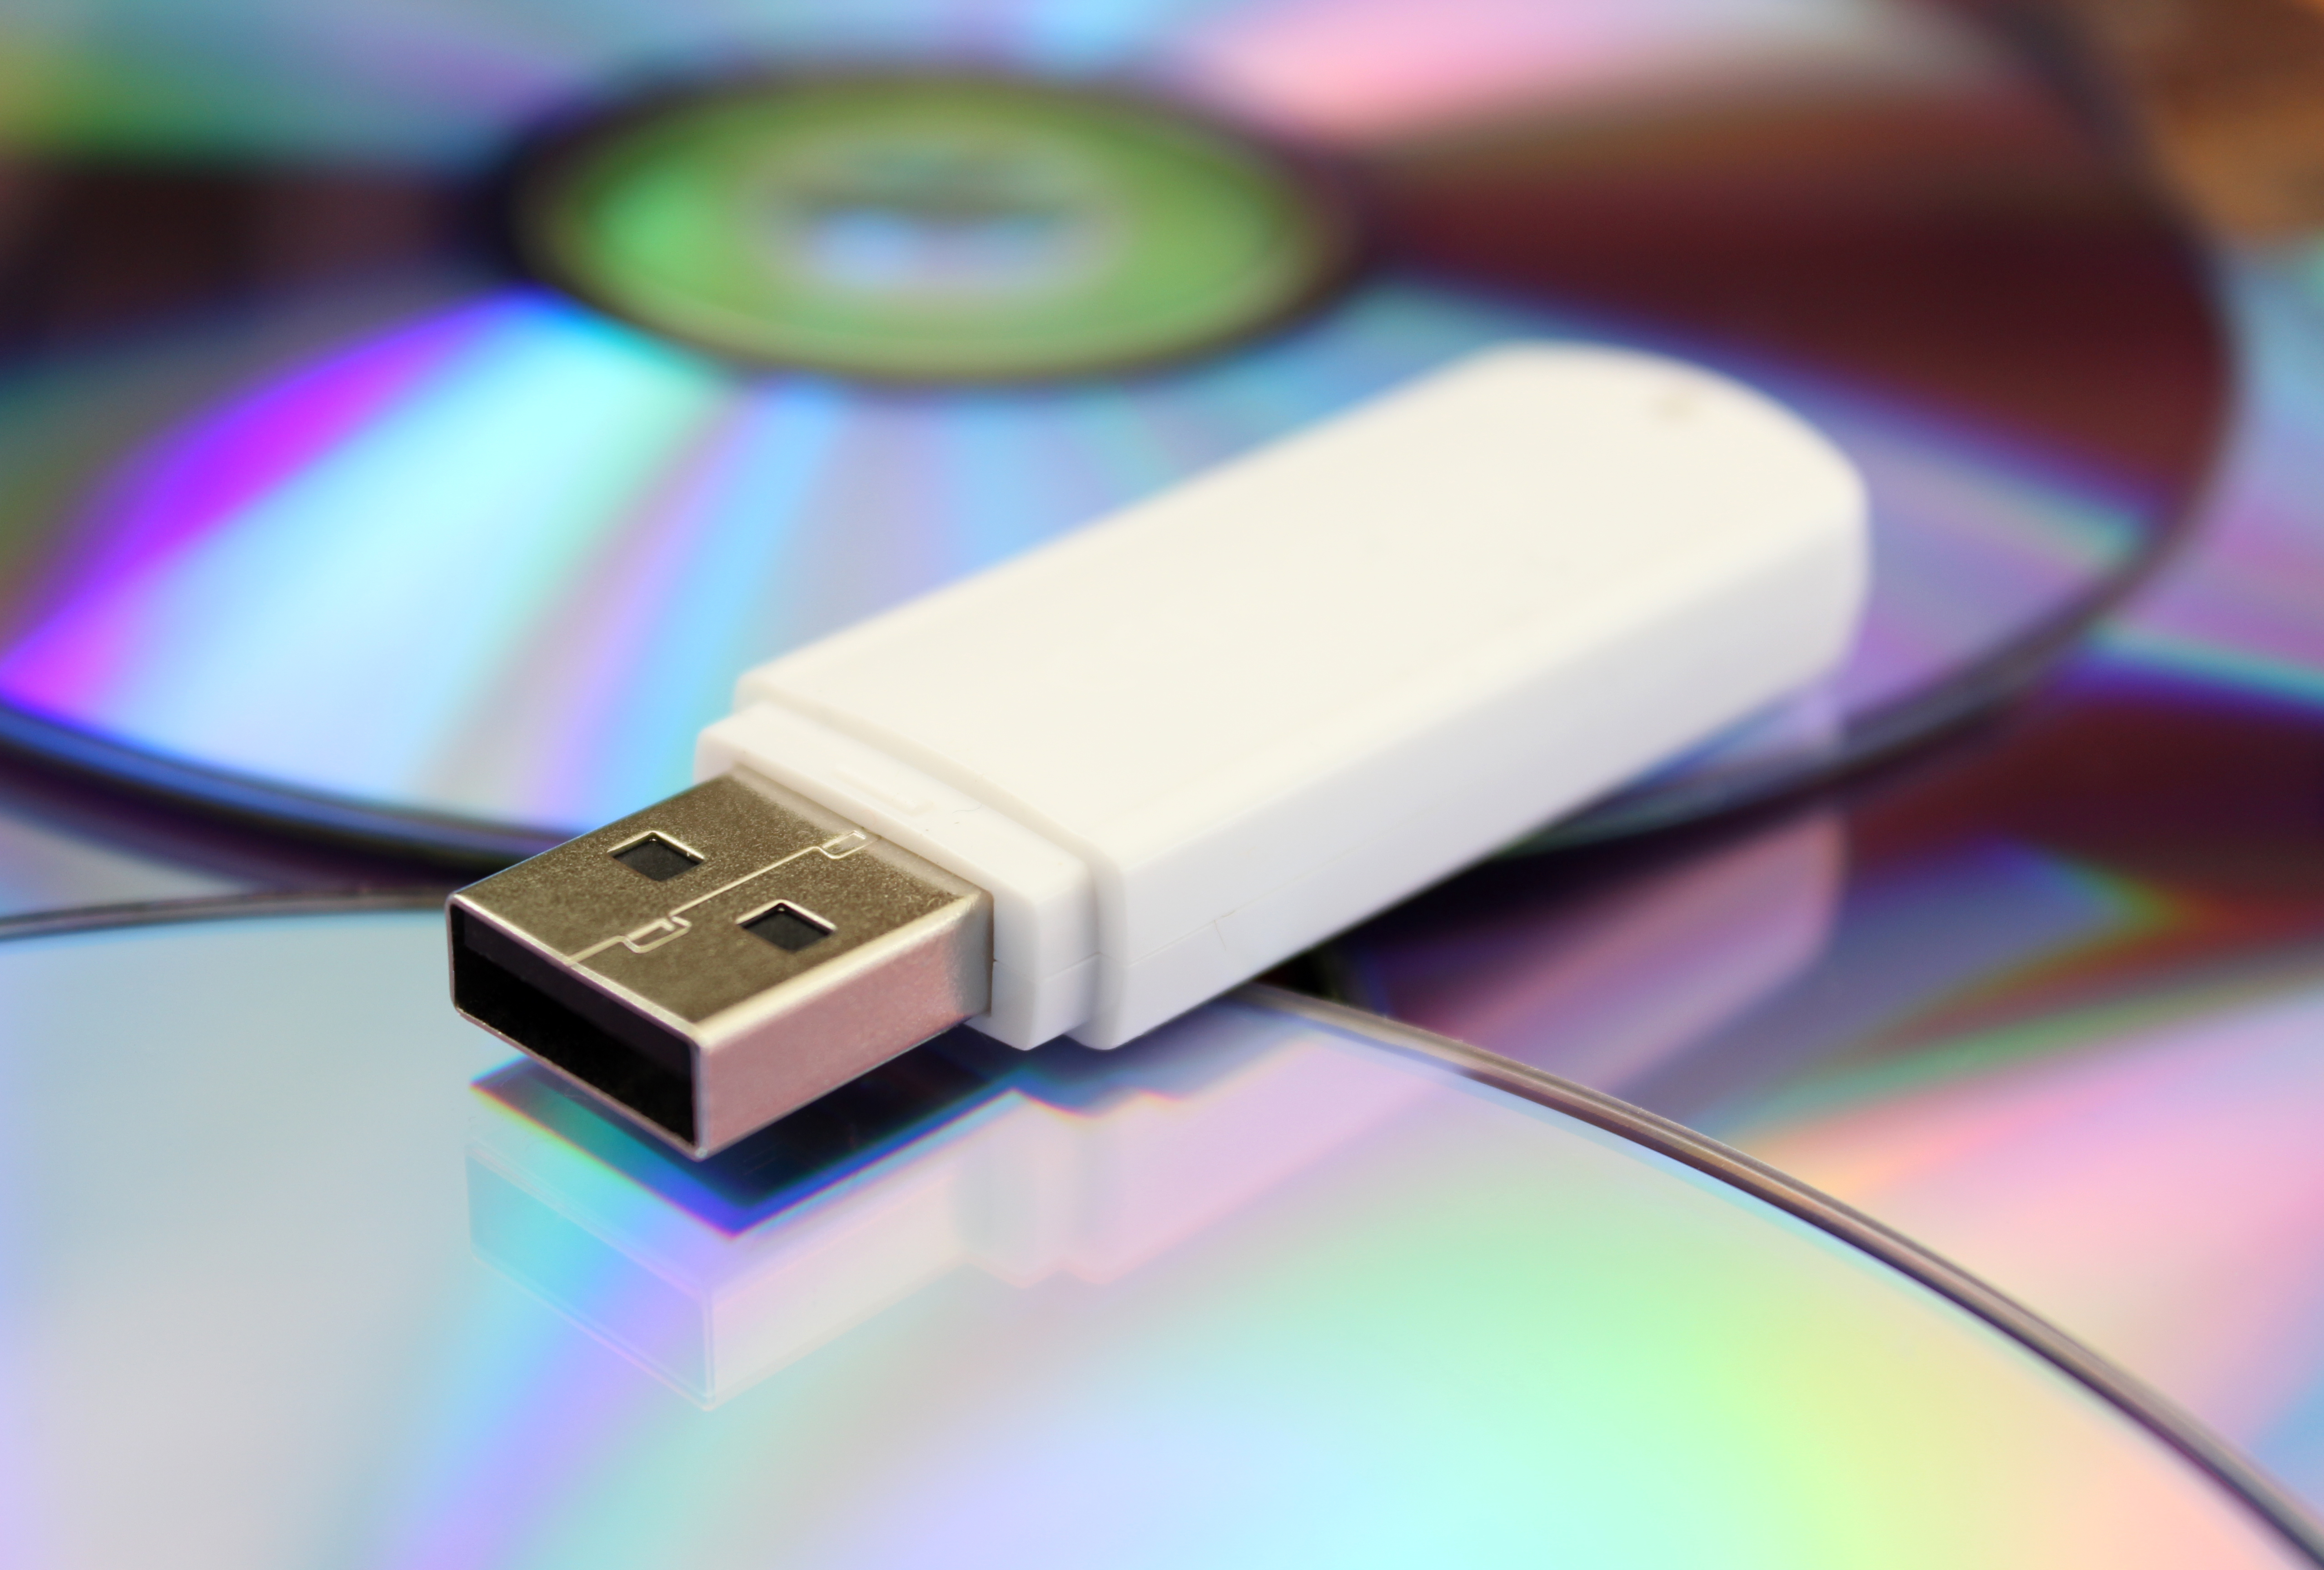 Bevise I stor skala Playful How to Copy a Music CD to a USB Drive | Techwalla